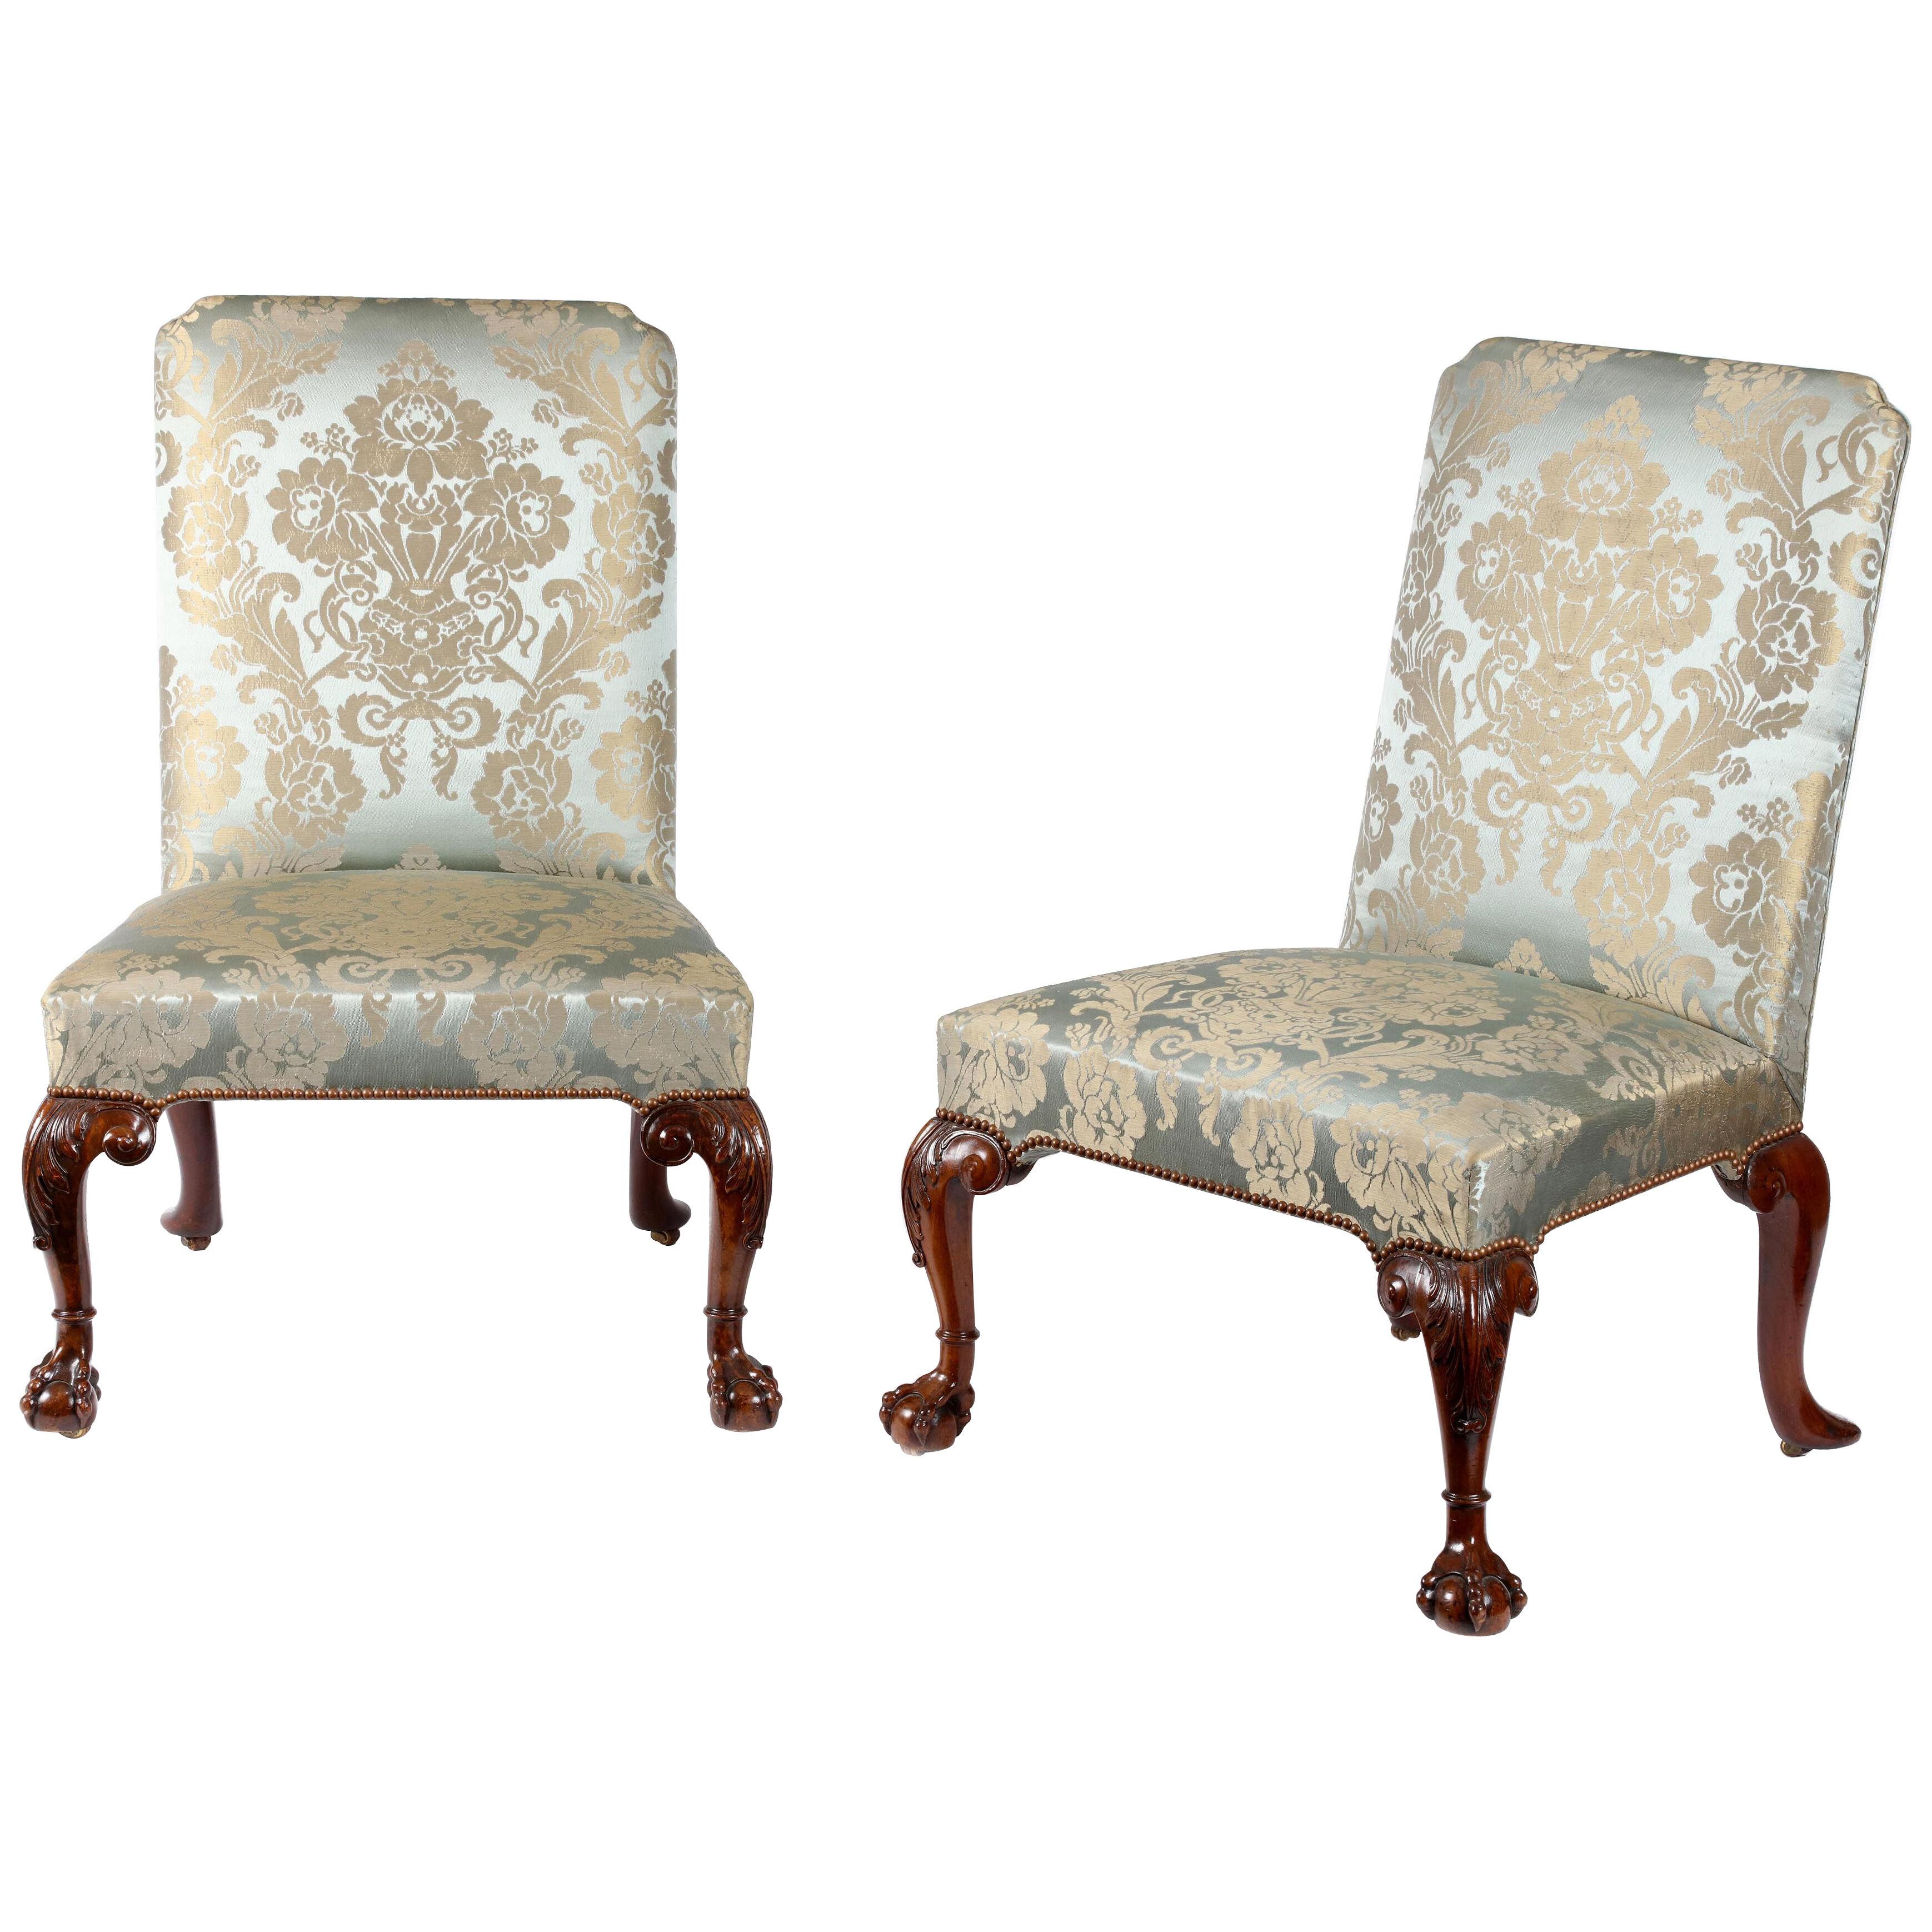 A pair of George II carved walnut side chairs attributed to William Hallet